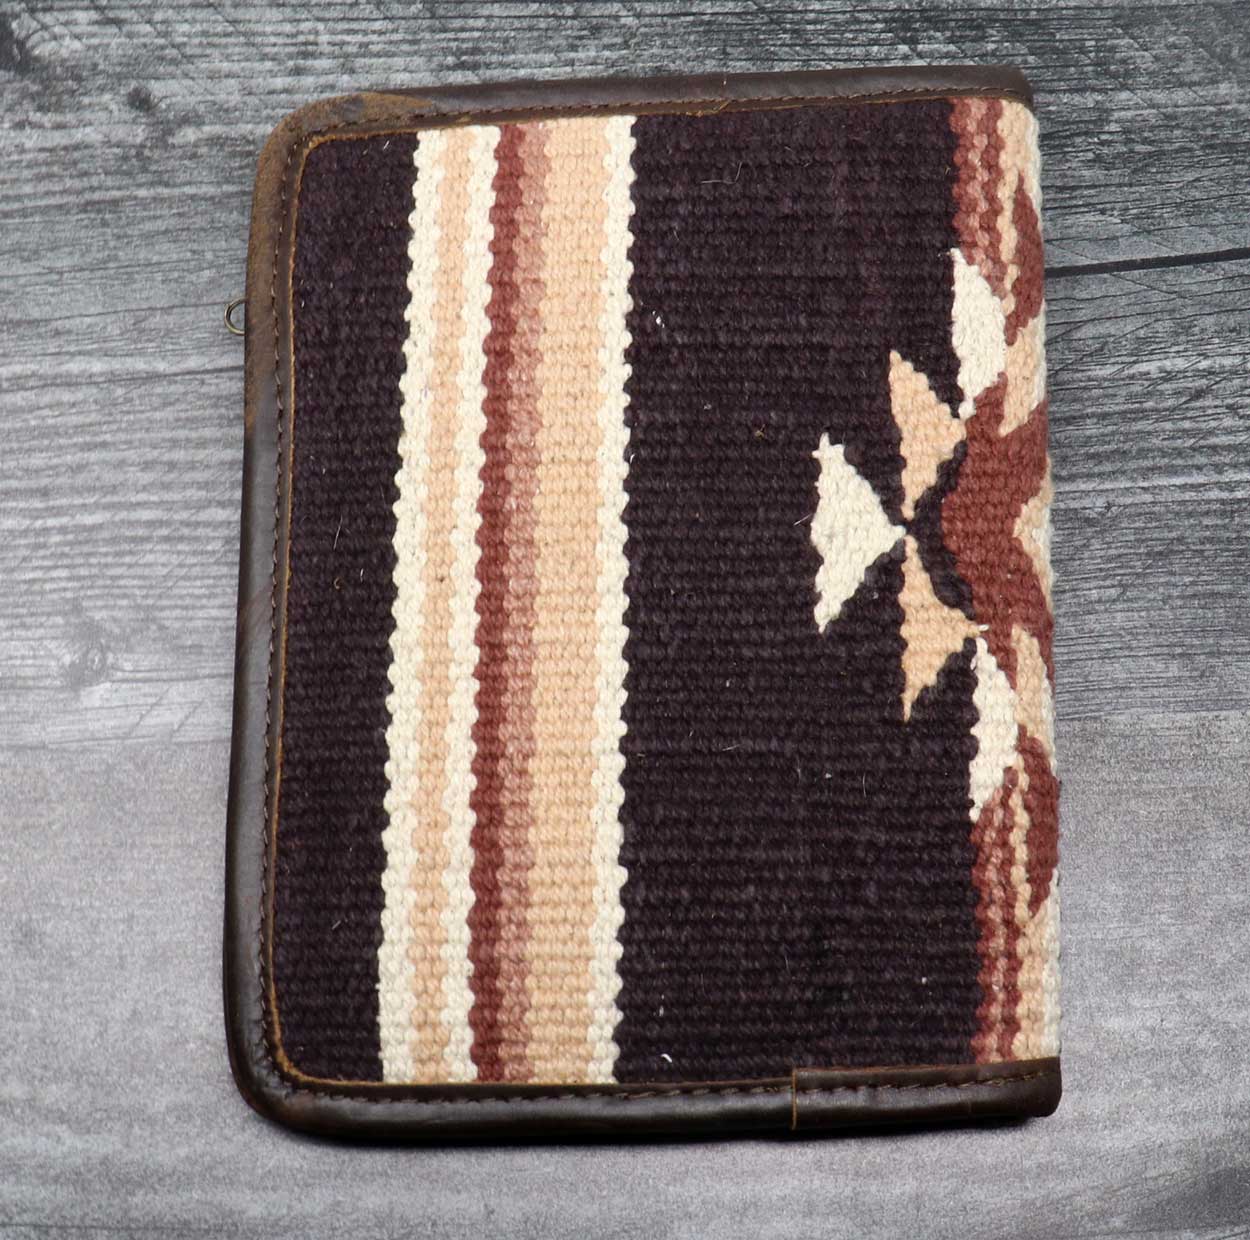 STS Sioux Falls Manetic Wallet